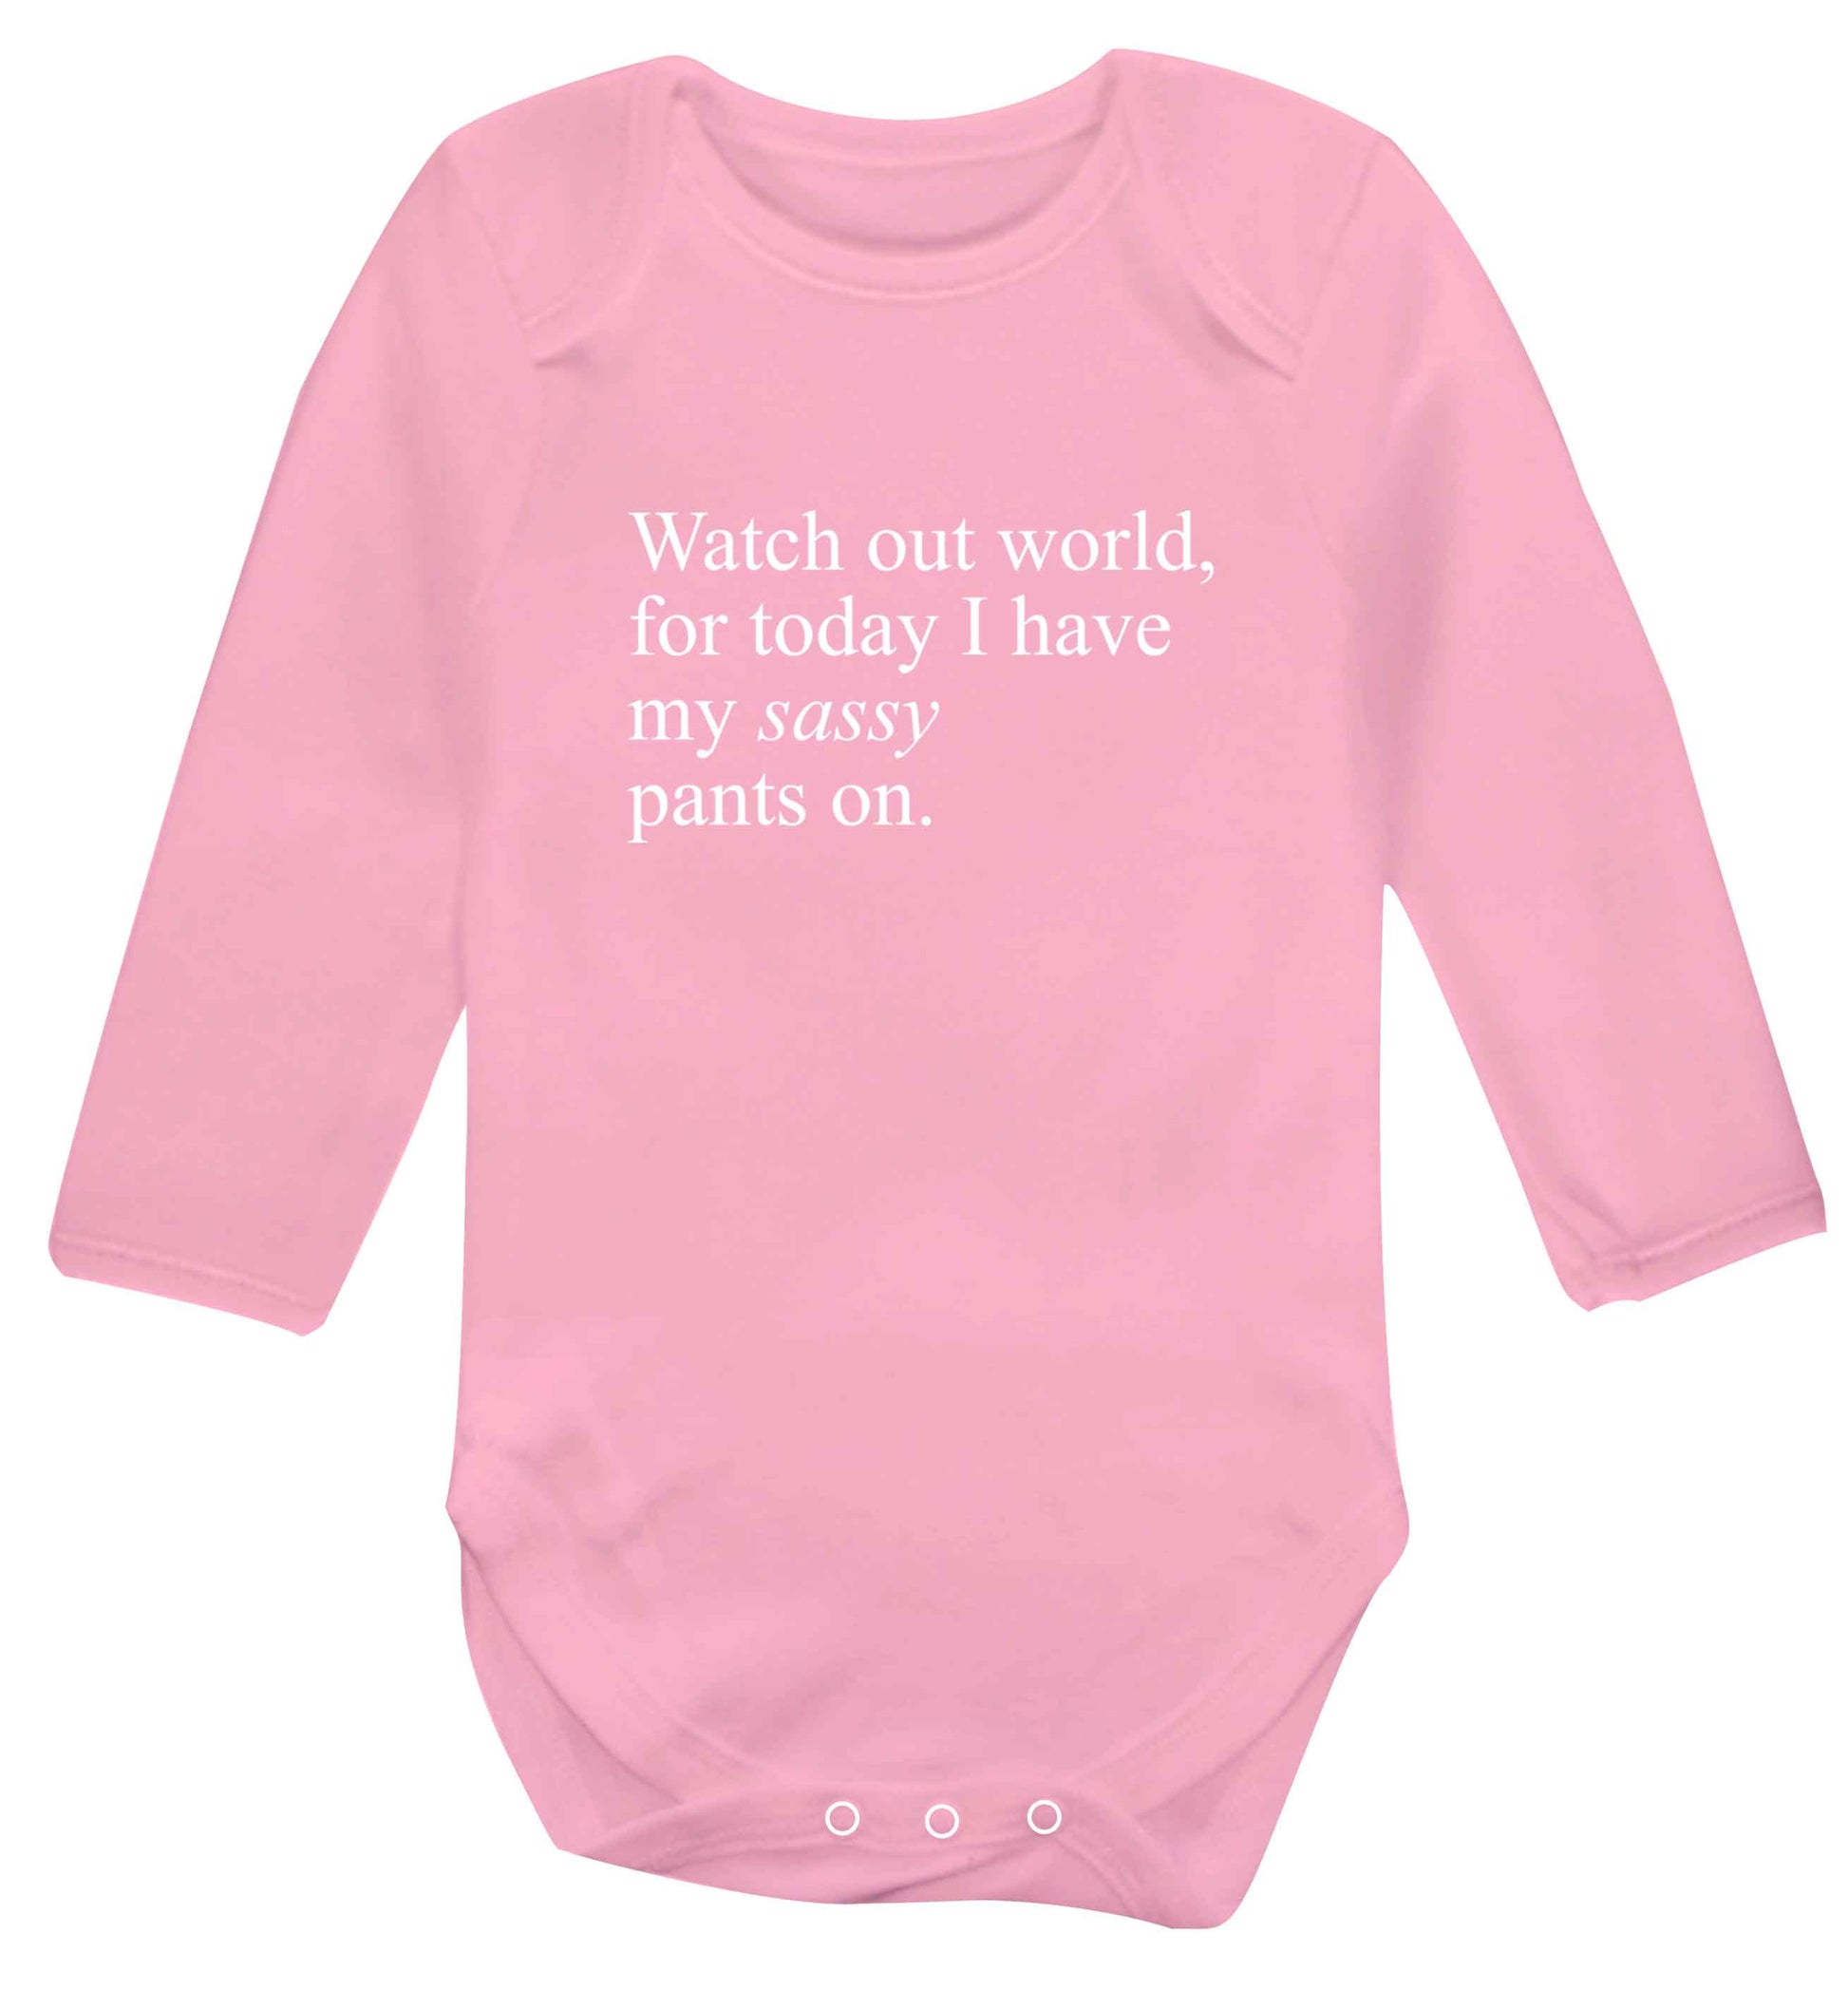 Watch out world for today I have my sassy pants on baby vest long sleeved pale pink 6-12 months